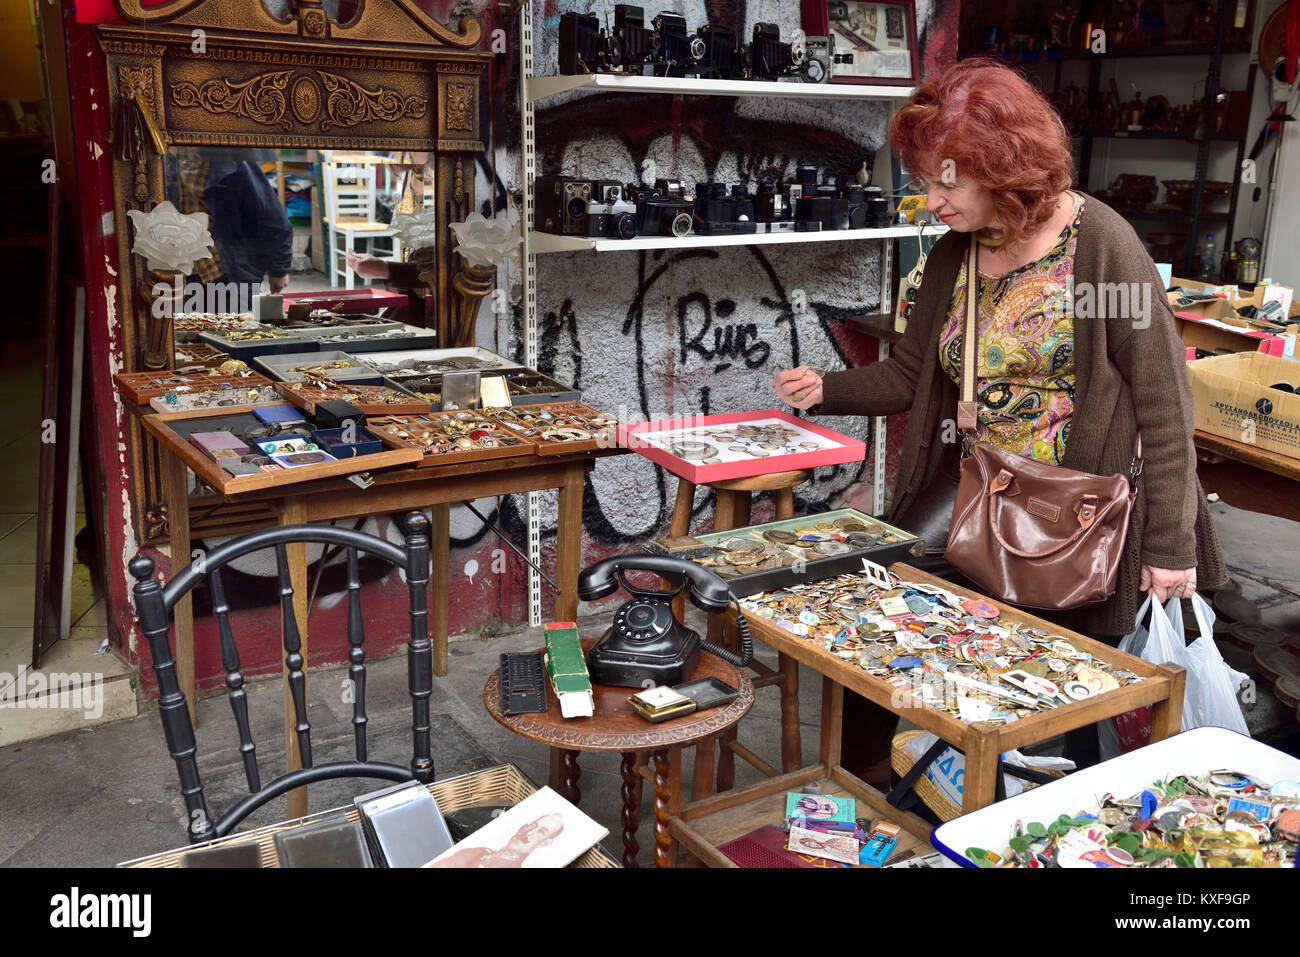 Woman at flea market looking at bric-a-brac in antiques stall, Athens, Greece Stock Photo